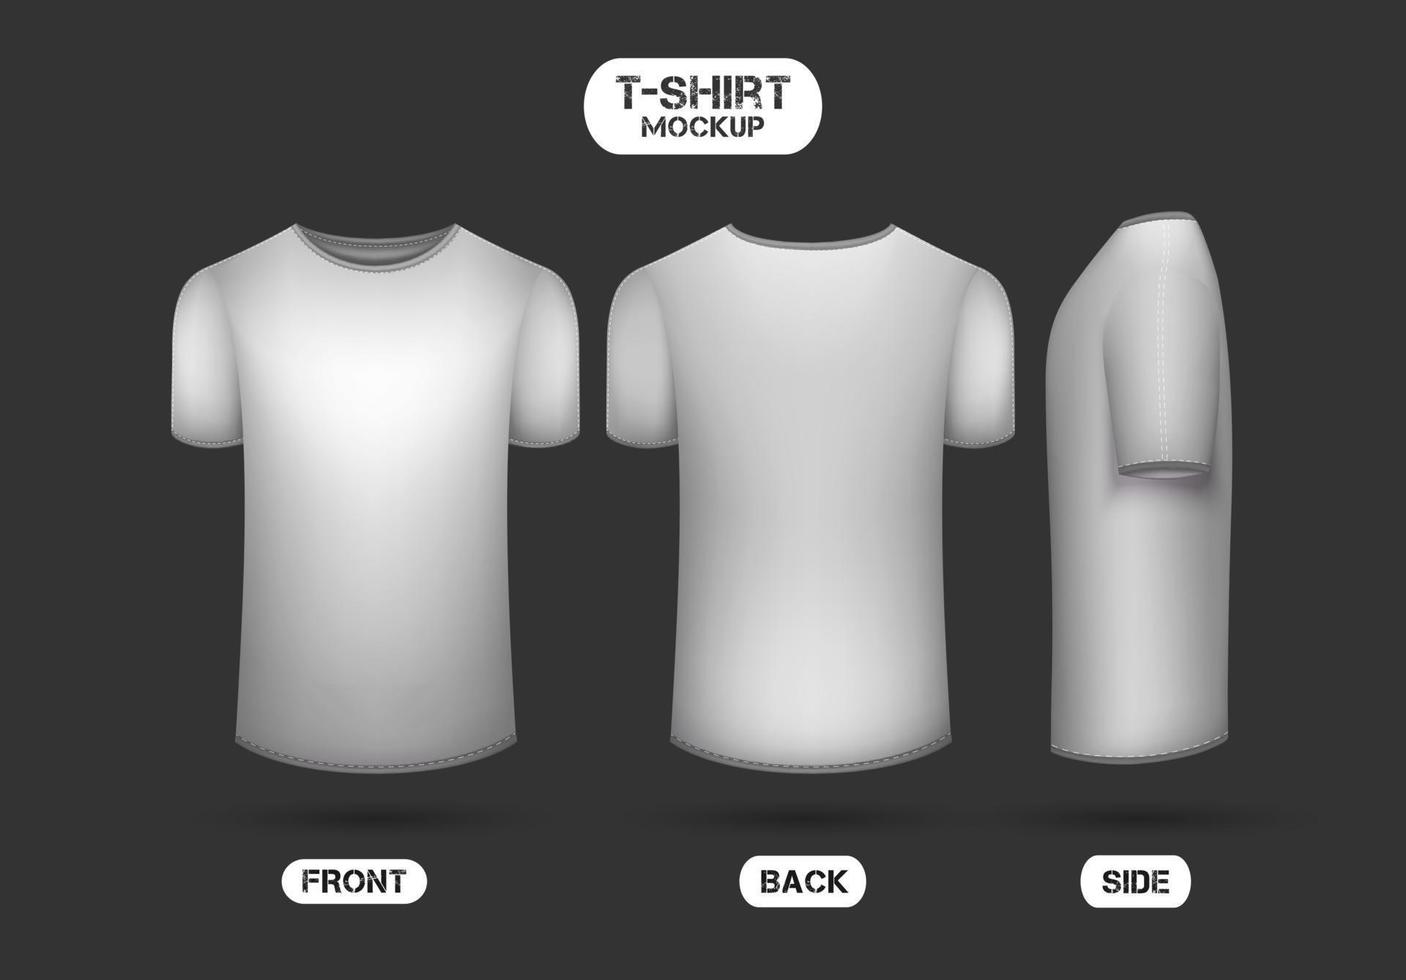 plain white t-shirt design, with front, back and side view, 3d style t-shirt mockup vector